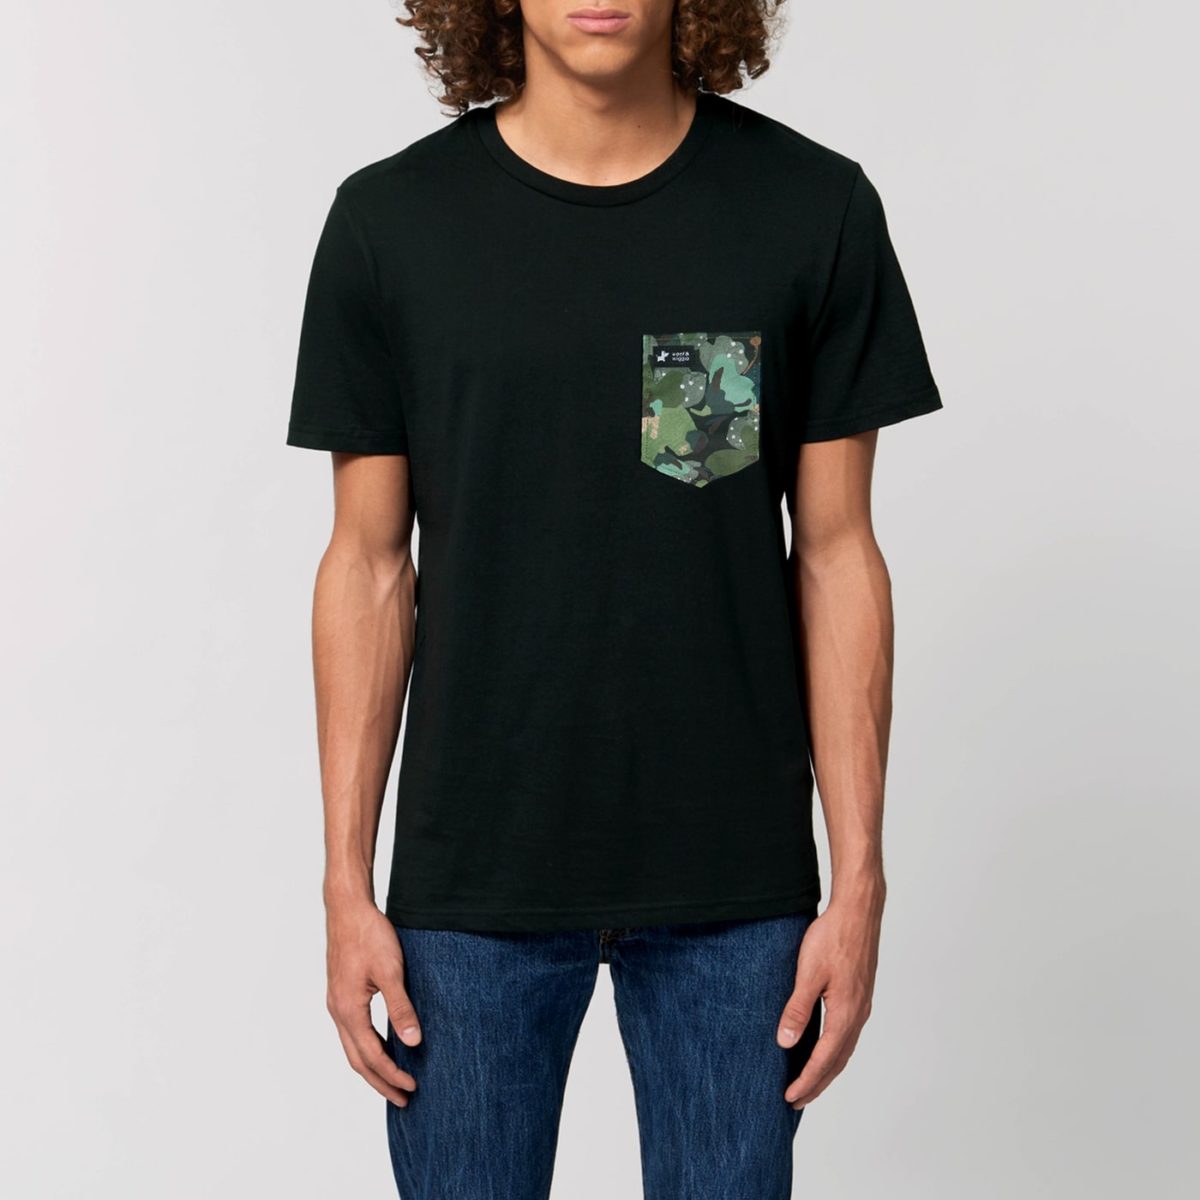 T-Shirt "Camouflage"